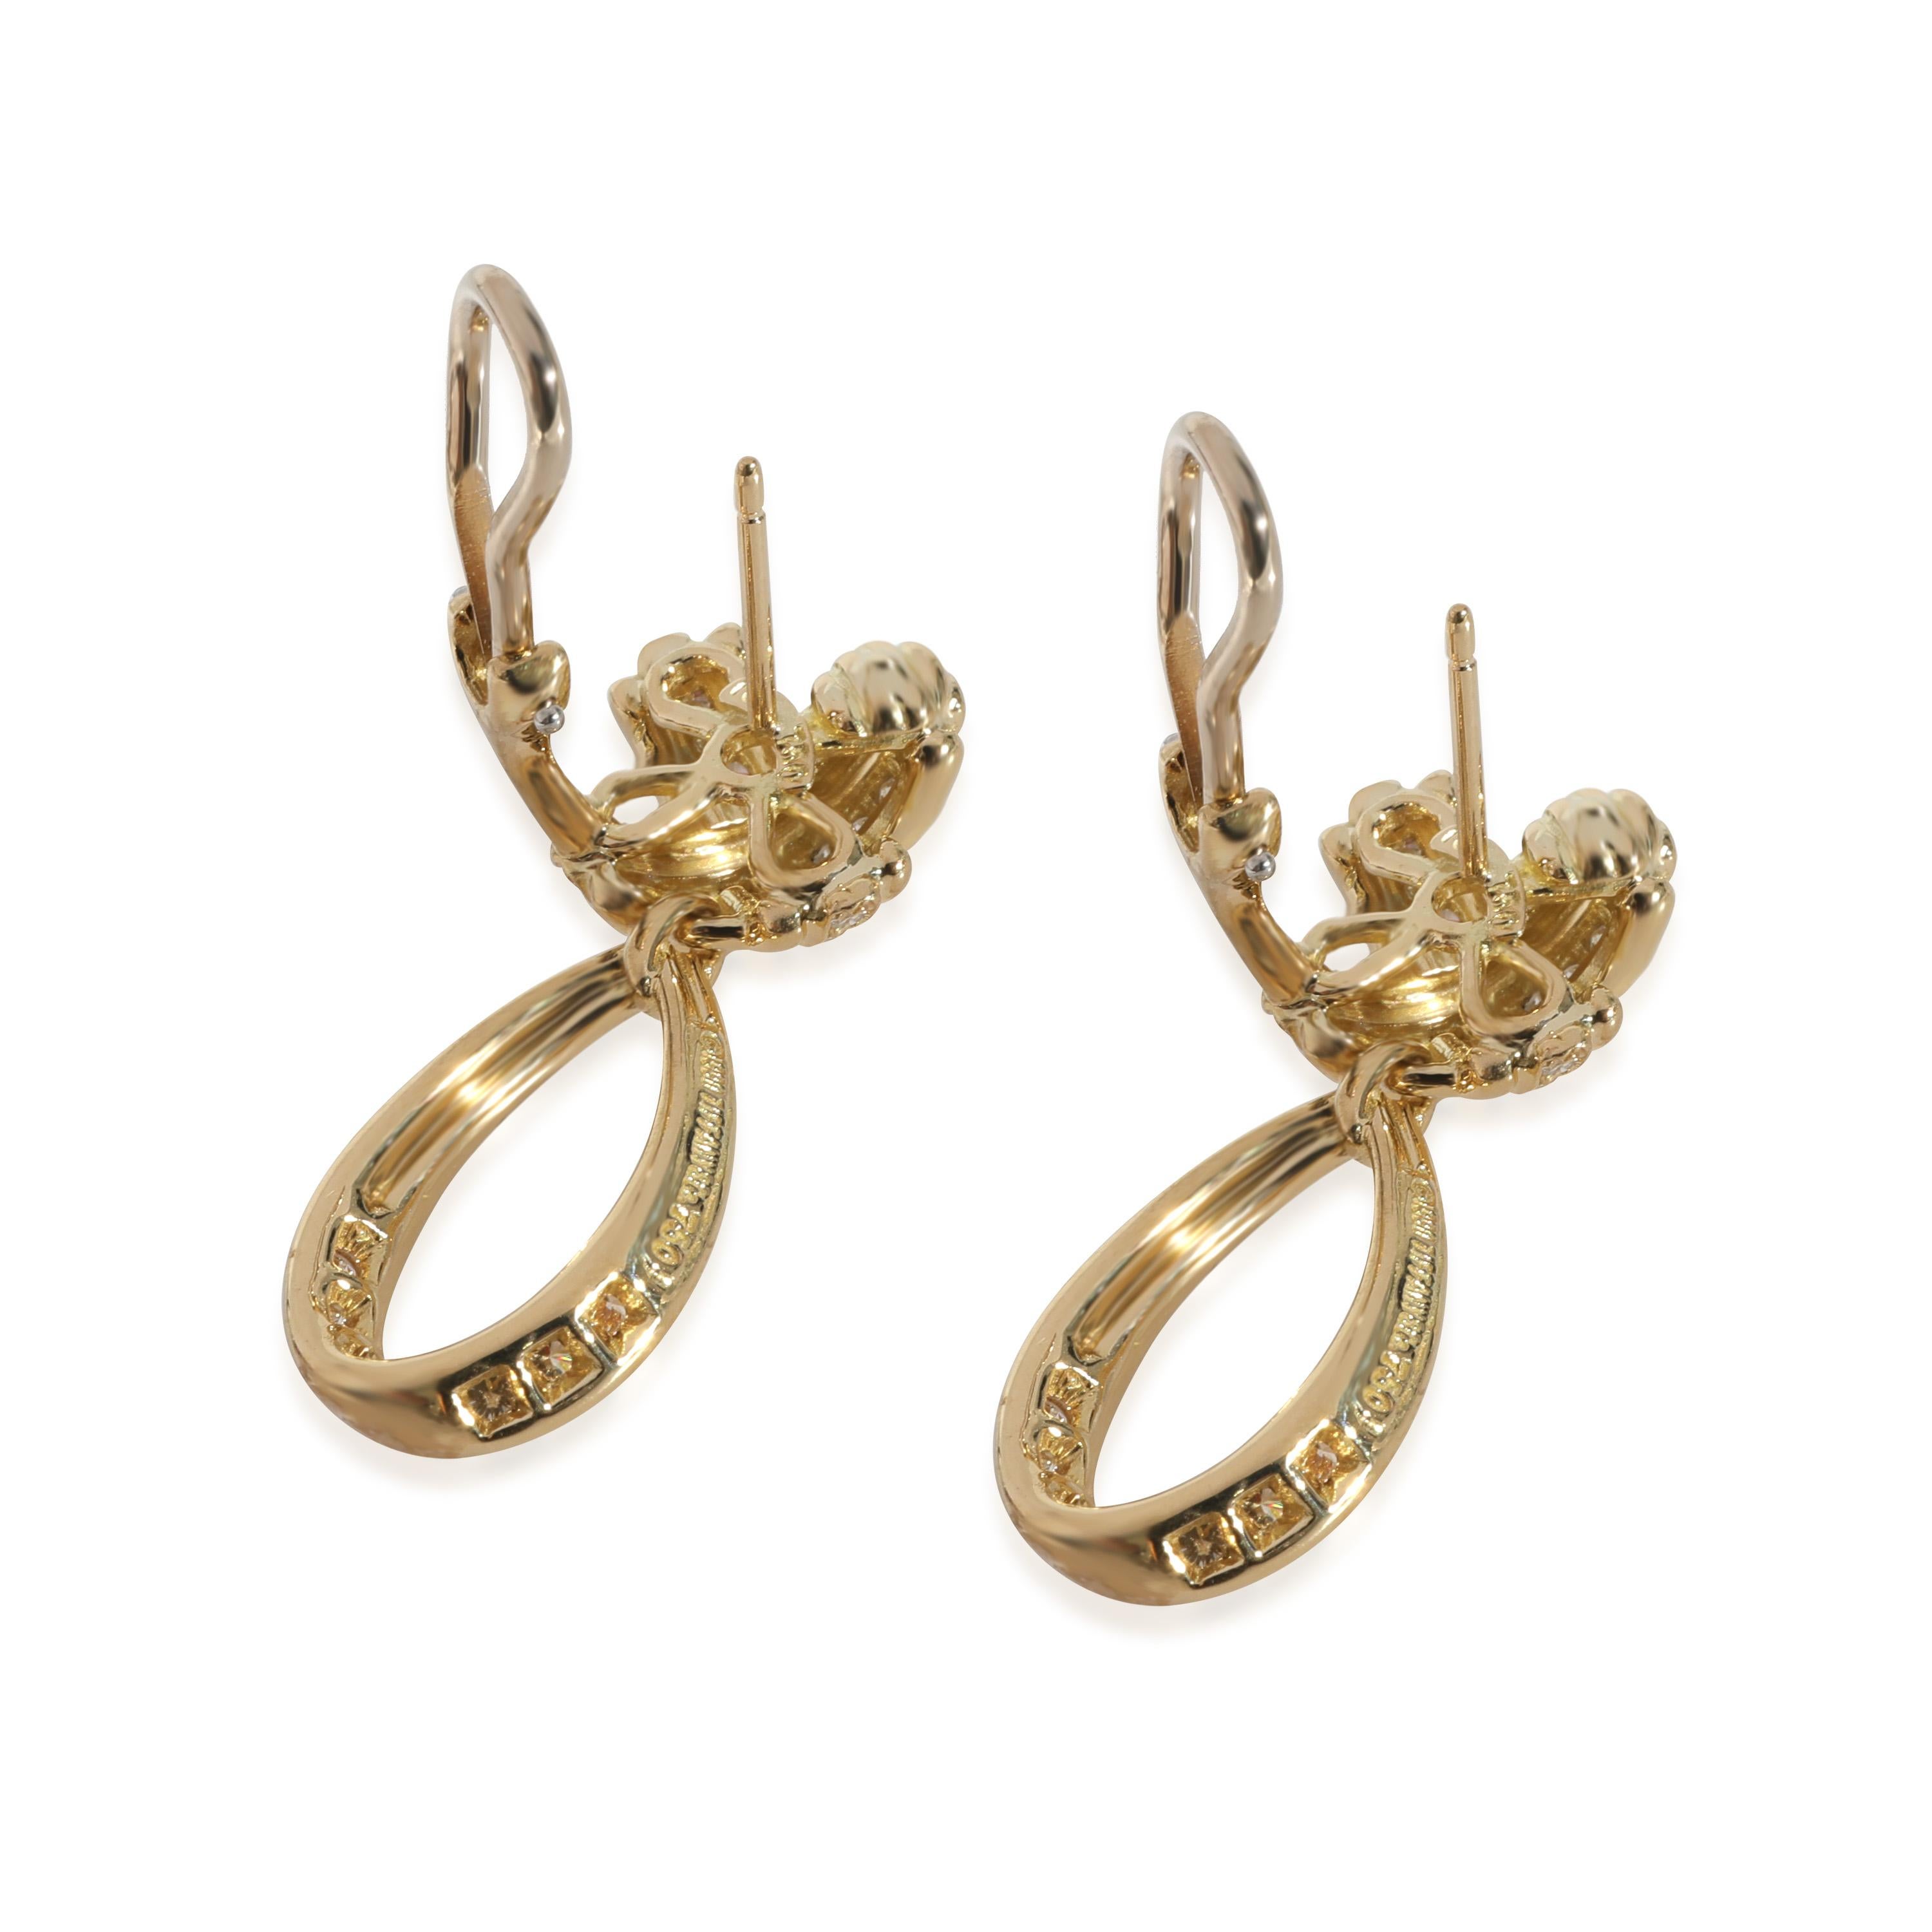 Tiffany & Co. Vintage Signature X Diamond Earrings in 18k Yellow Gold 0.6 CTW

PRIMARY DETAILS
SKU: 130212
Listing Title: Tiffany & Co. Vintage Signature X Diamond Earrings in 18k Yellow Gold 0.6 CTW
Condition Description: Retails for 6500 USD. In